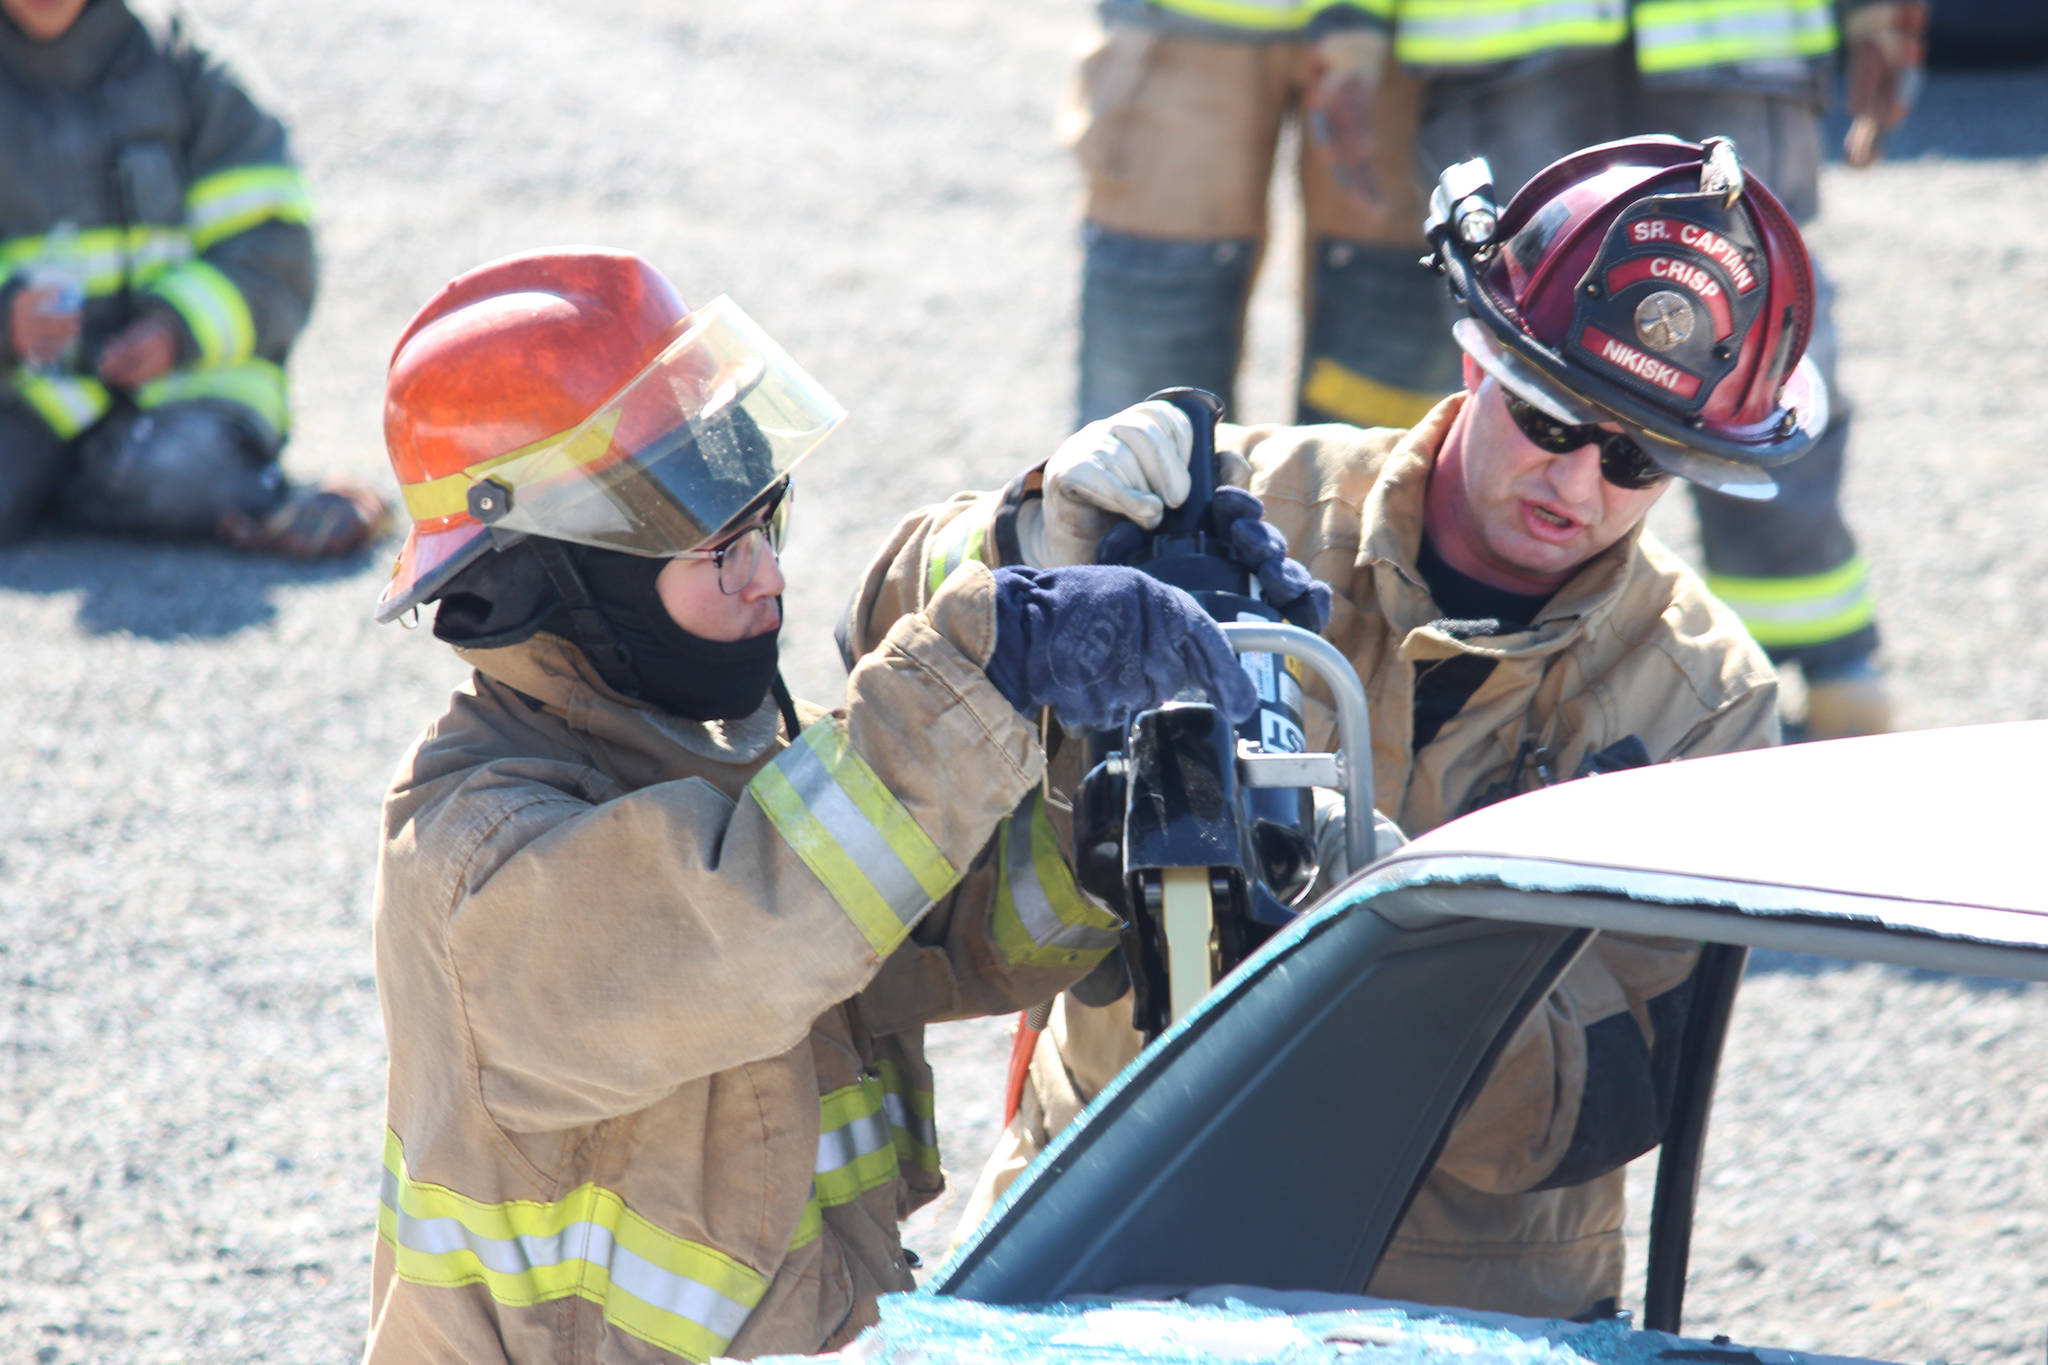 Steven Jacob, 19, from the Kuskokwim Learning Academy, practices using the jaws of life on a car with the help of instructor Bryan Crisp of the Nikiski Fire Department (right) on Thursday, April 20, 2017 at the department’s Station No. 2 in Nikiski, Alaska. Jacob and several other Western Alaska students spent the week getting basic firefighter training through Excel Alaska’s Camp Kick Ash. (Megan Pacer/Peninsula Clarion)